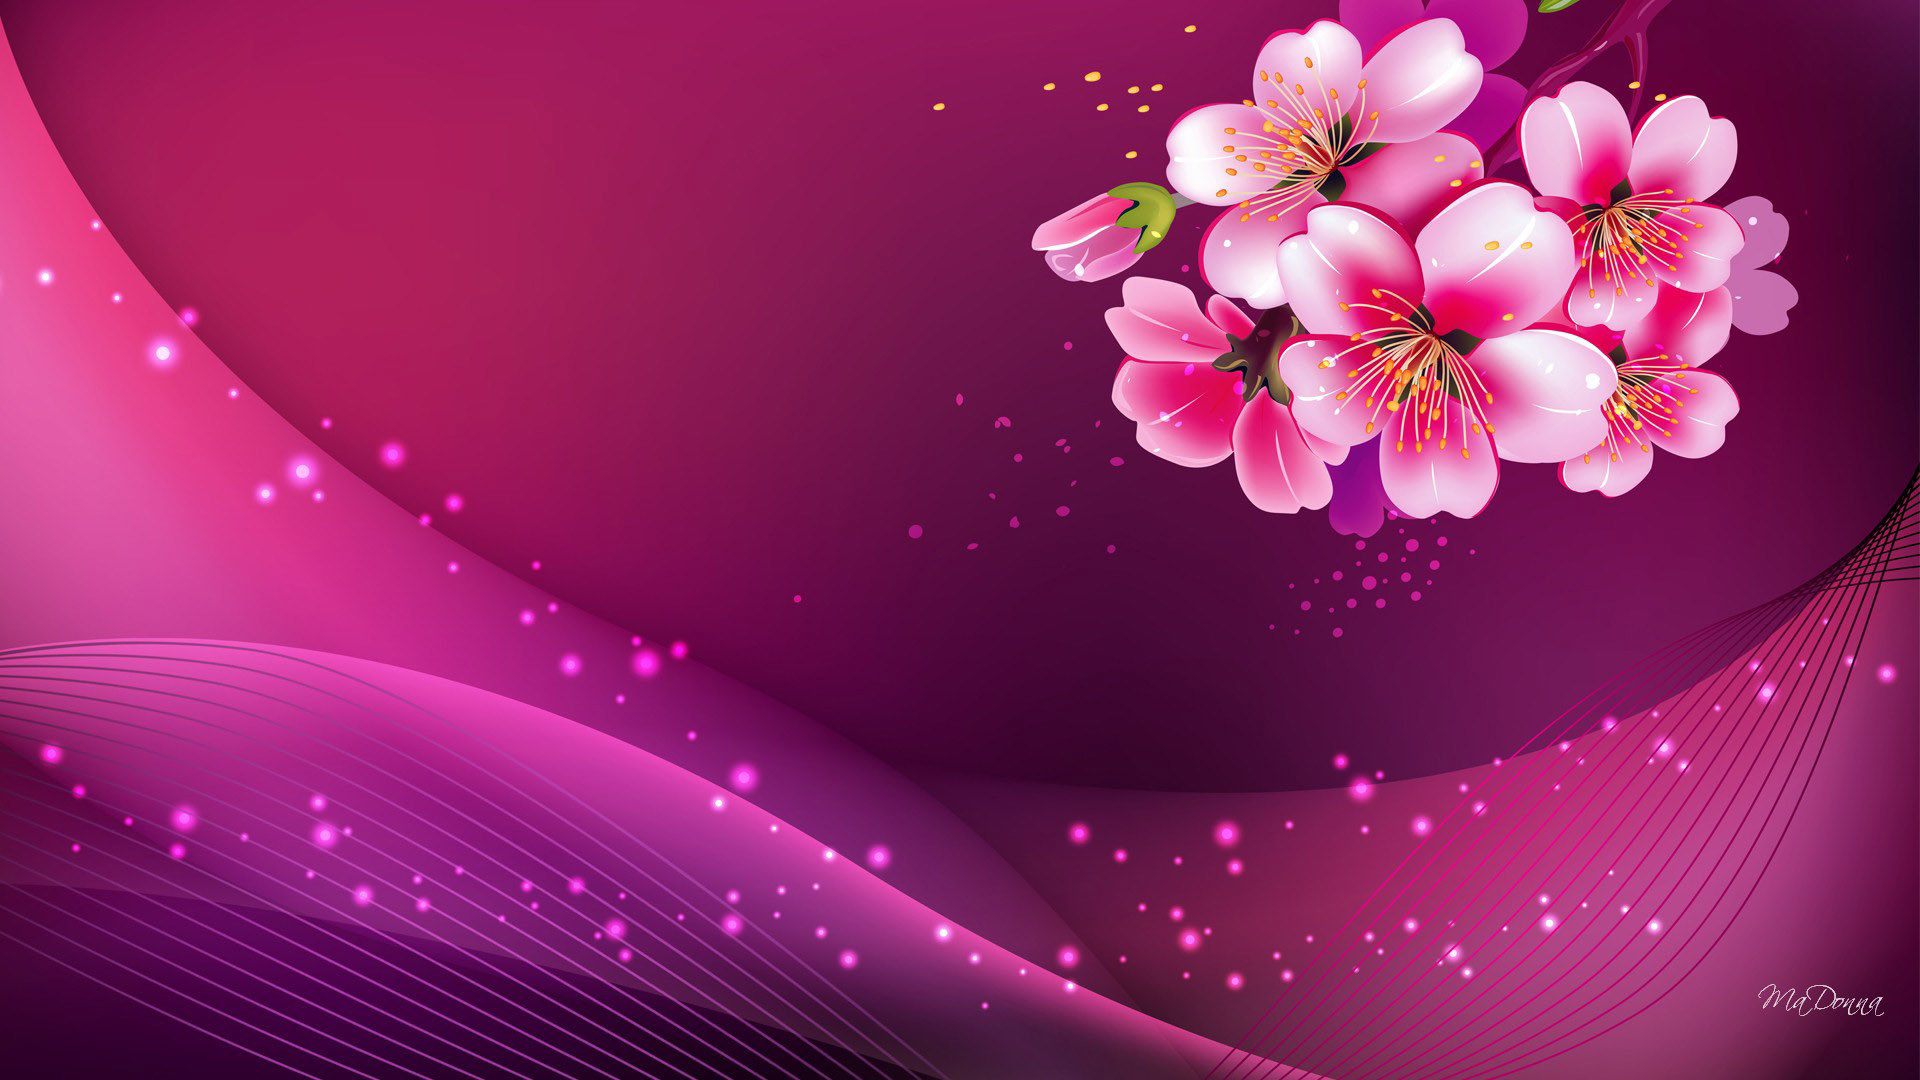 1920x1080 wallpaper.wiki-Pink-abstract-wallpapers-hd-PIC-WPB0010632